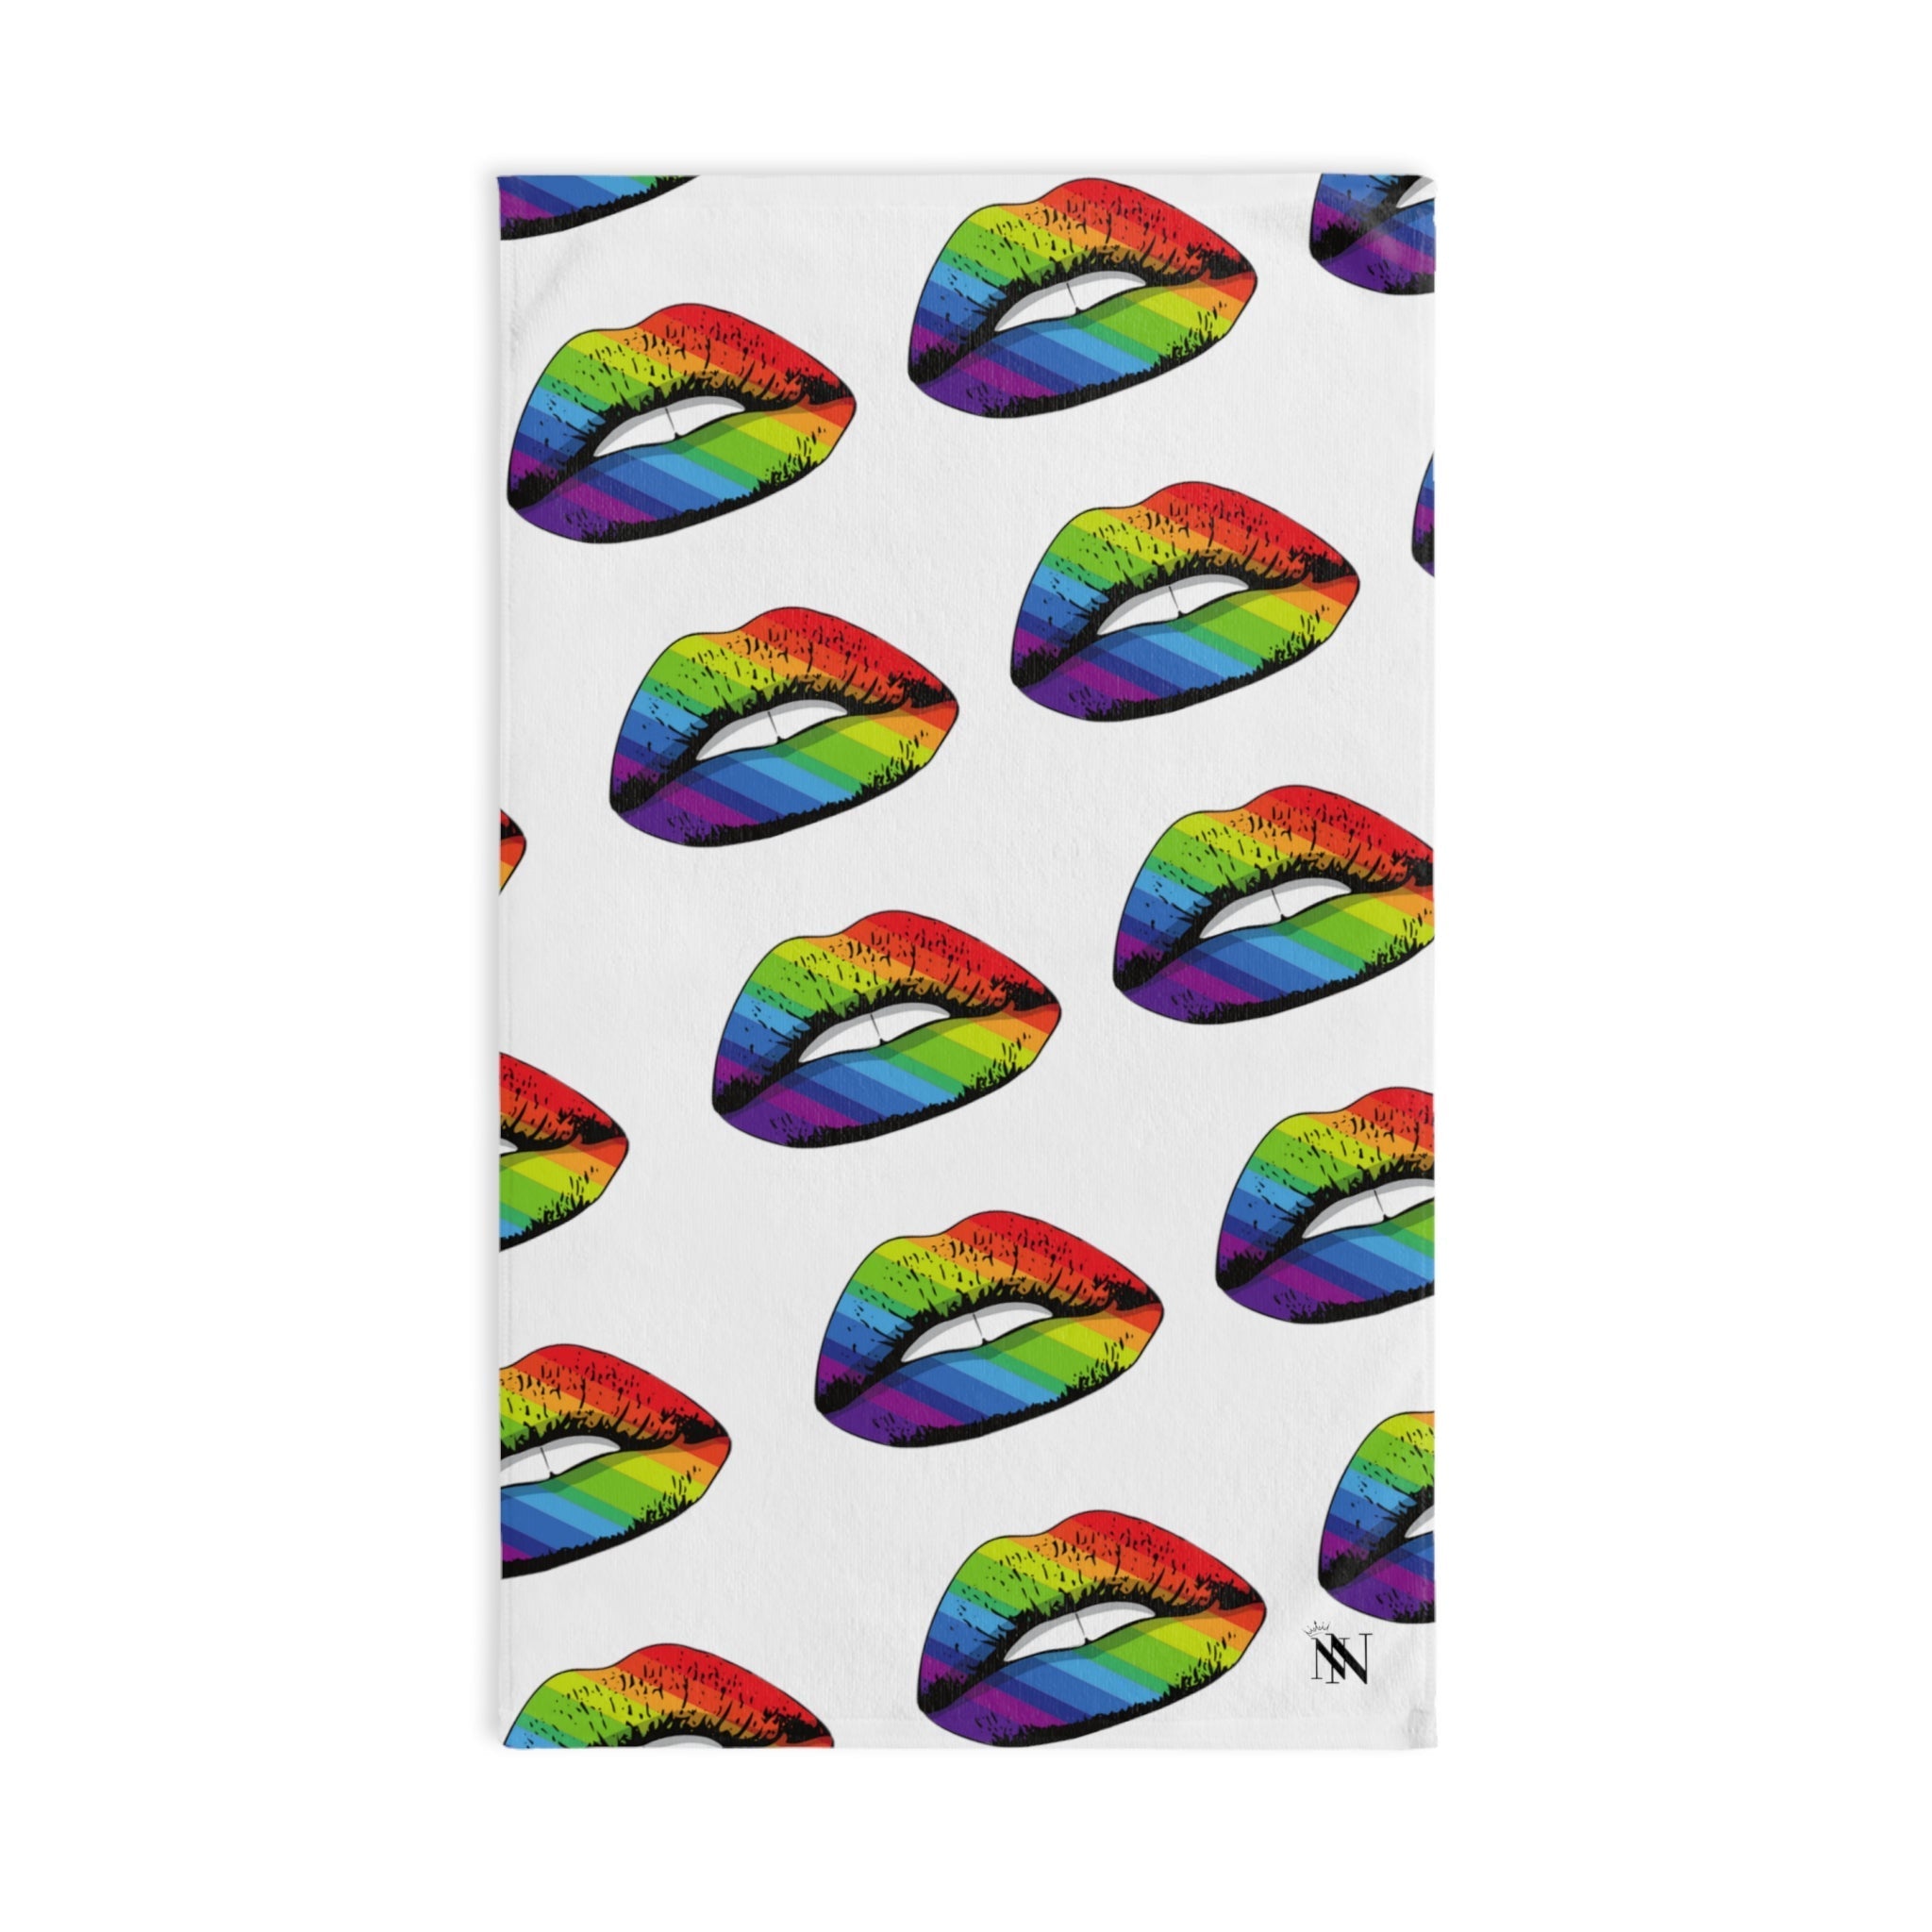 Rainbow Lips Pattern White | Funny Gifts for Men - Gifts for Him - Birthday Gifts for Men, Him, Her, Husband, Boyfriend, Girlfriend, New Couple Gifts, Fathers & Valentines Day Gifts, Christmas Gifts NECTAR NAPKINS